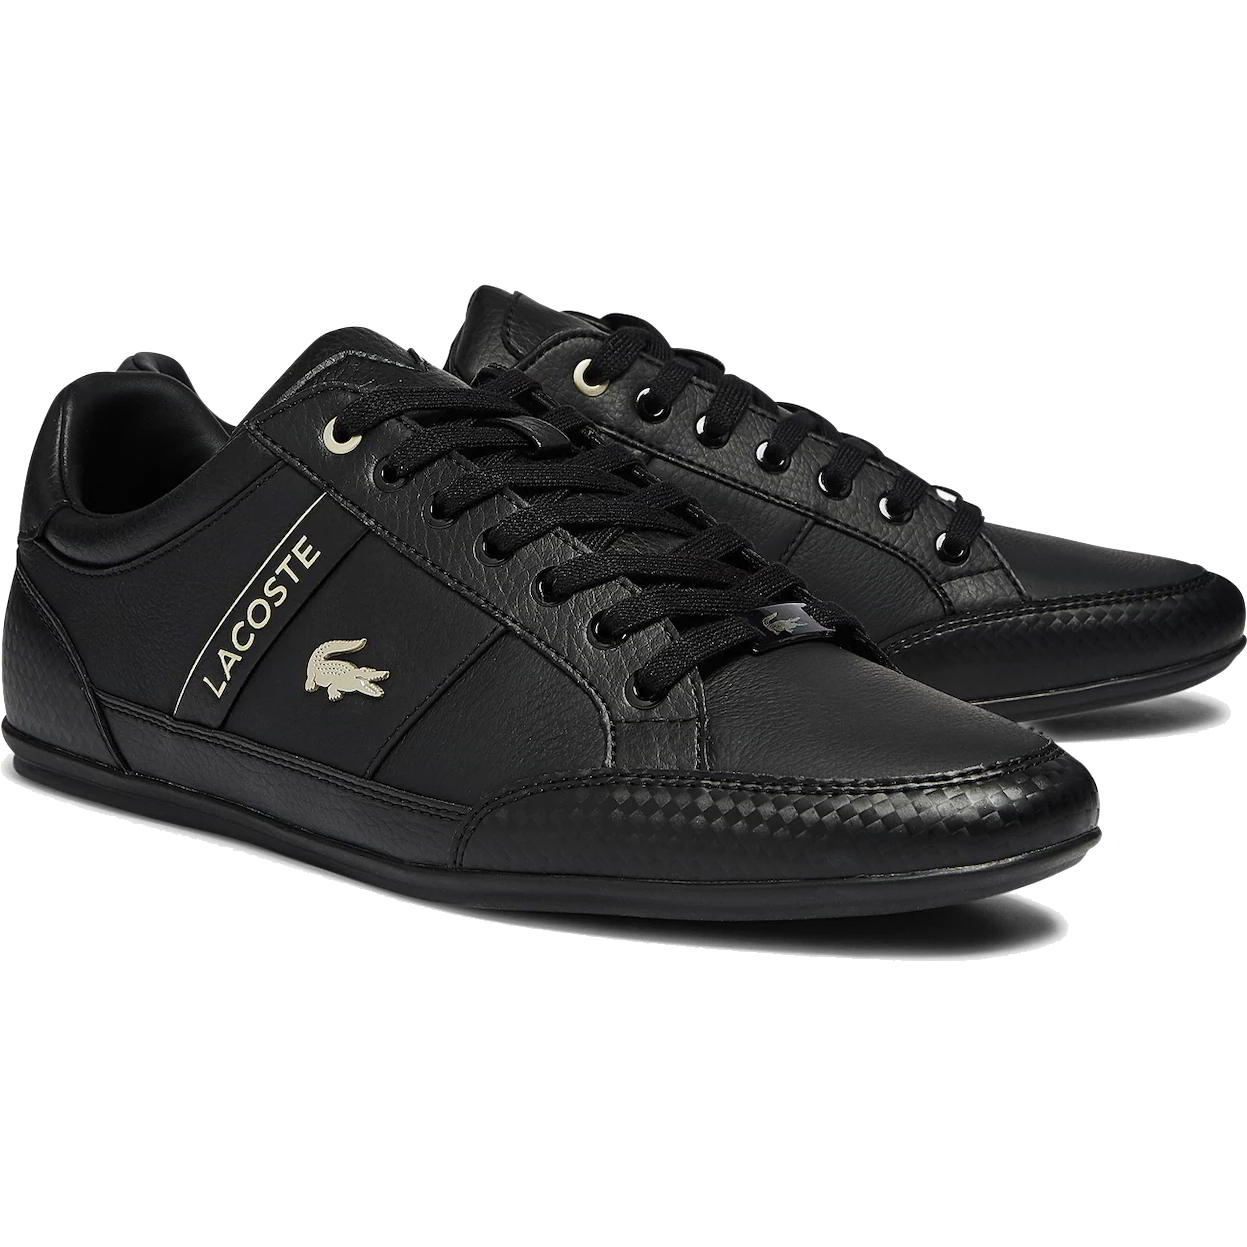 Lacoste Mens Chaymon 721-3 Tainers - Black 2951